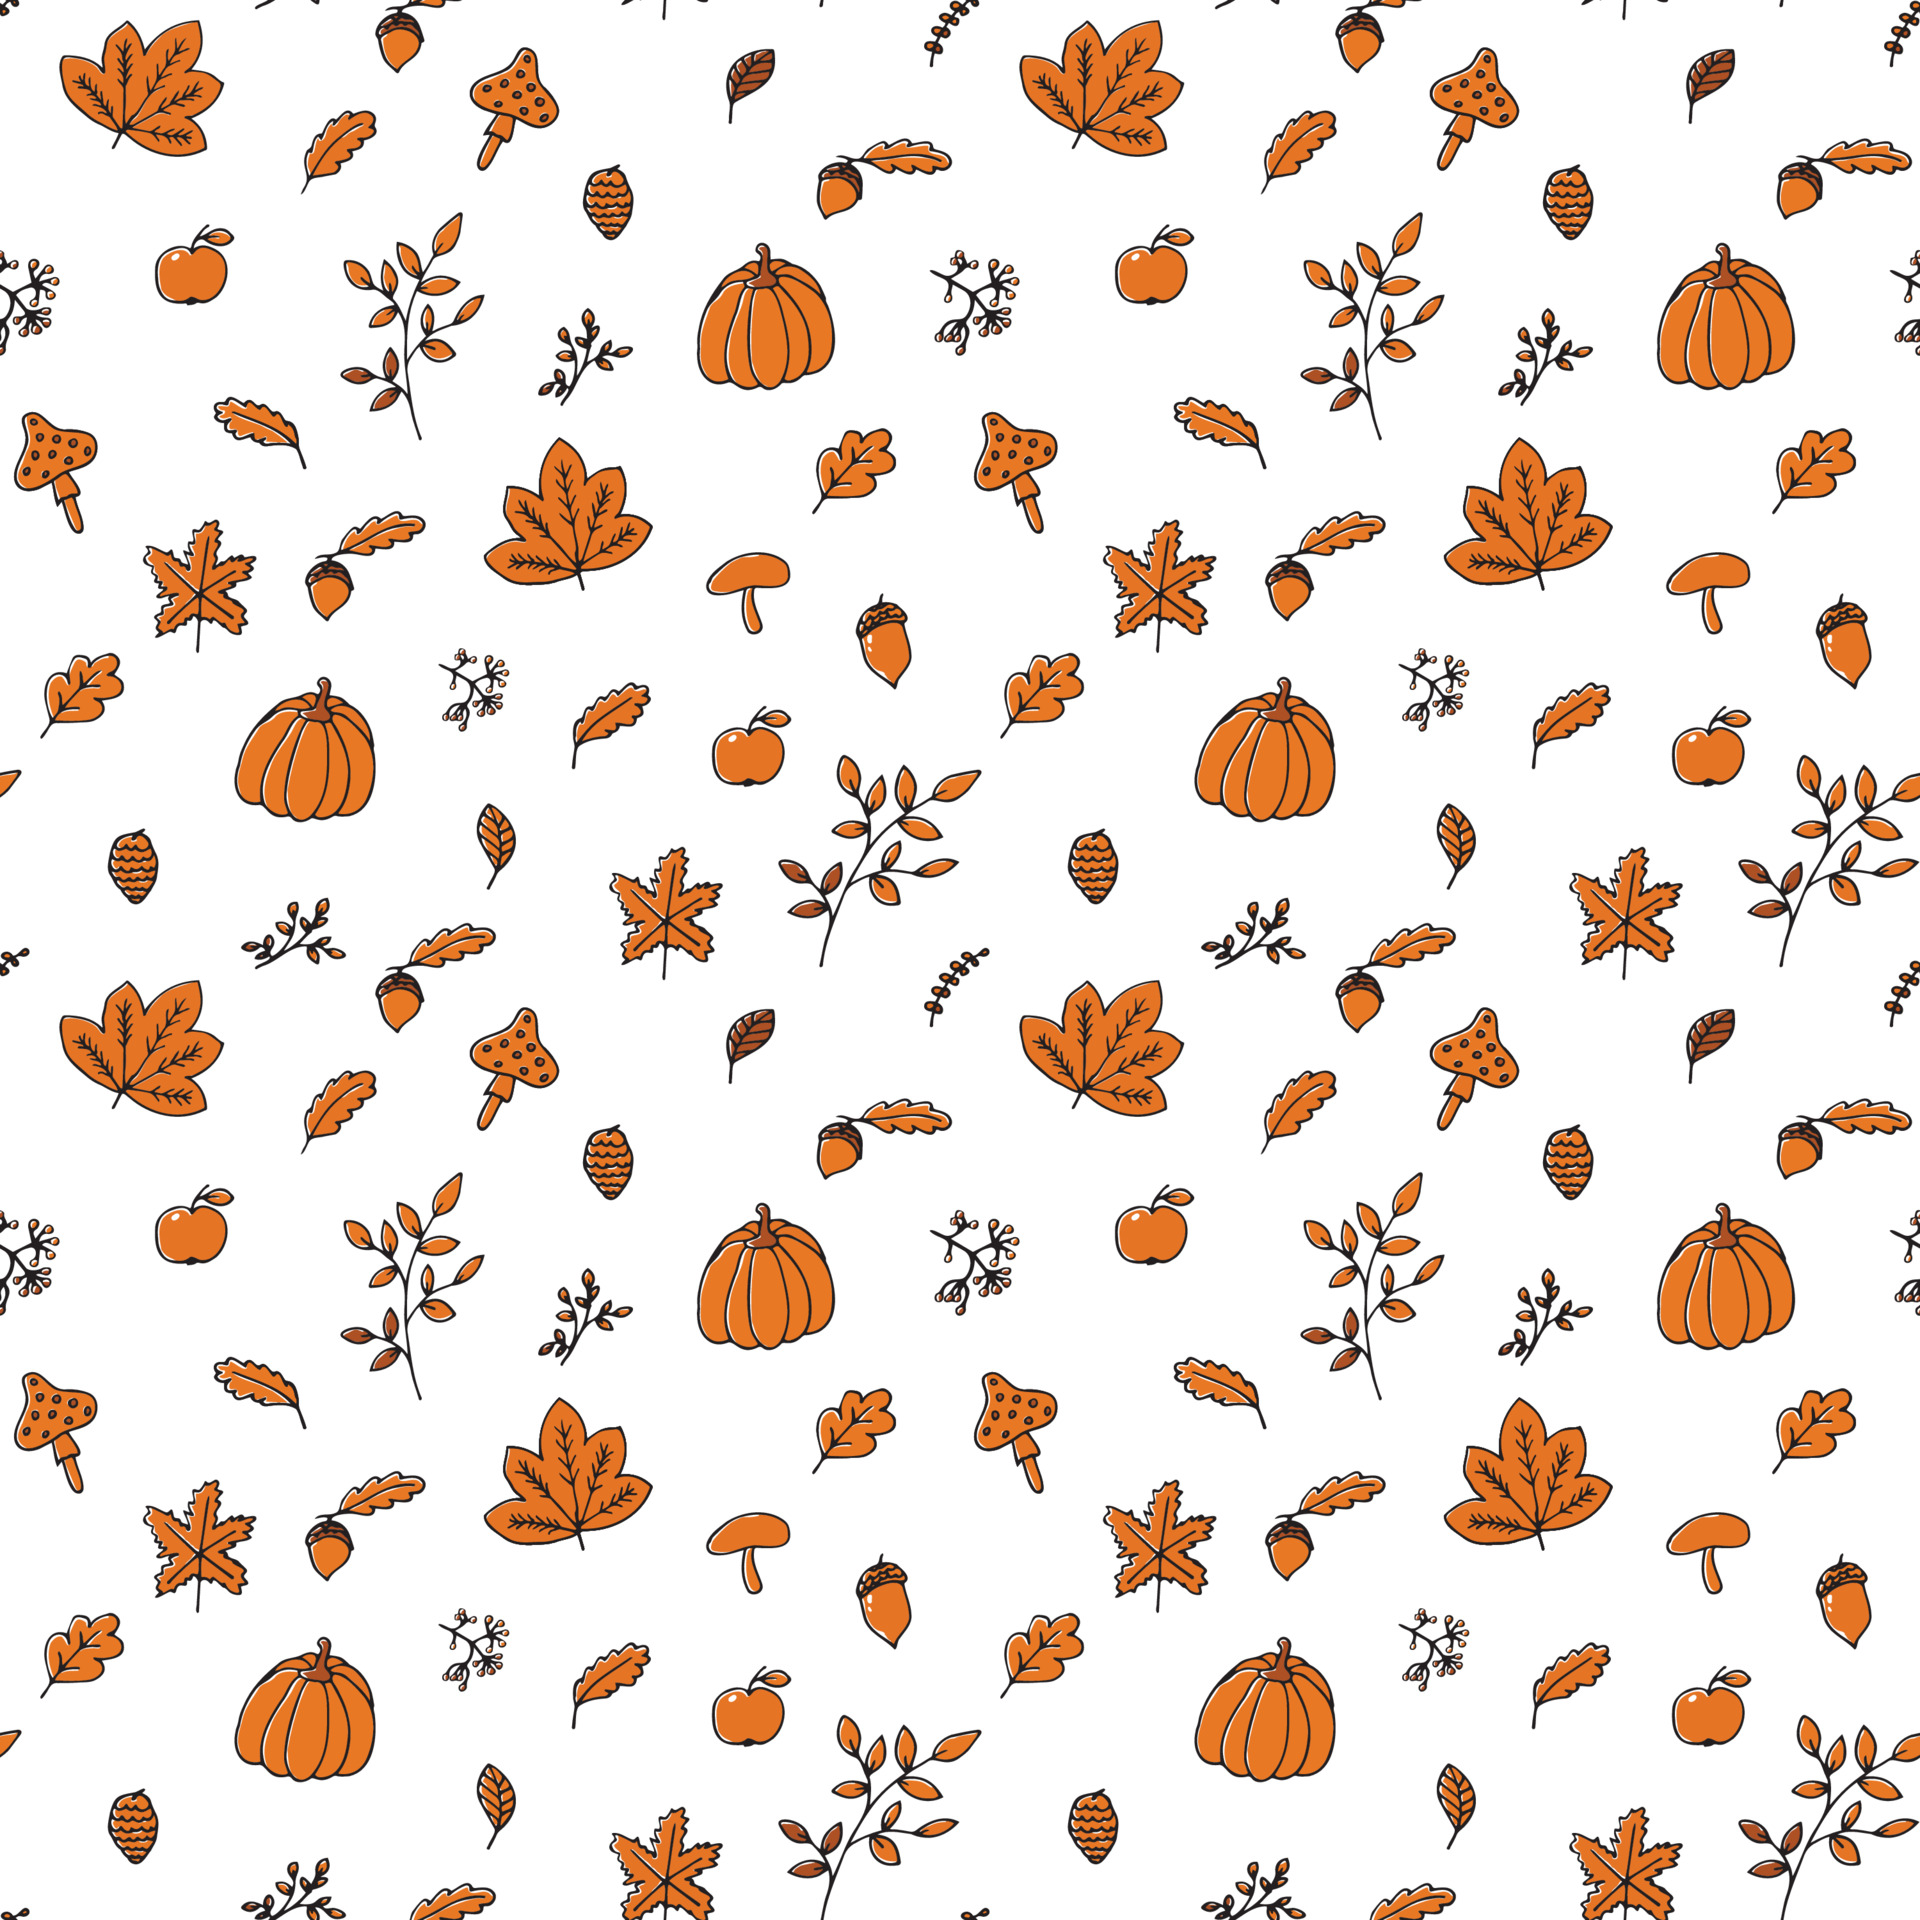 Autumn pattern in orange and brown tones with various fall items, background, wallpaper, create patterns or compositions, or decorate printed matter